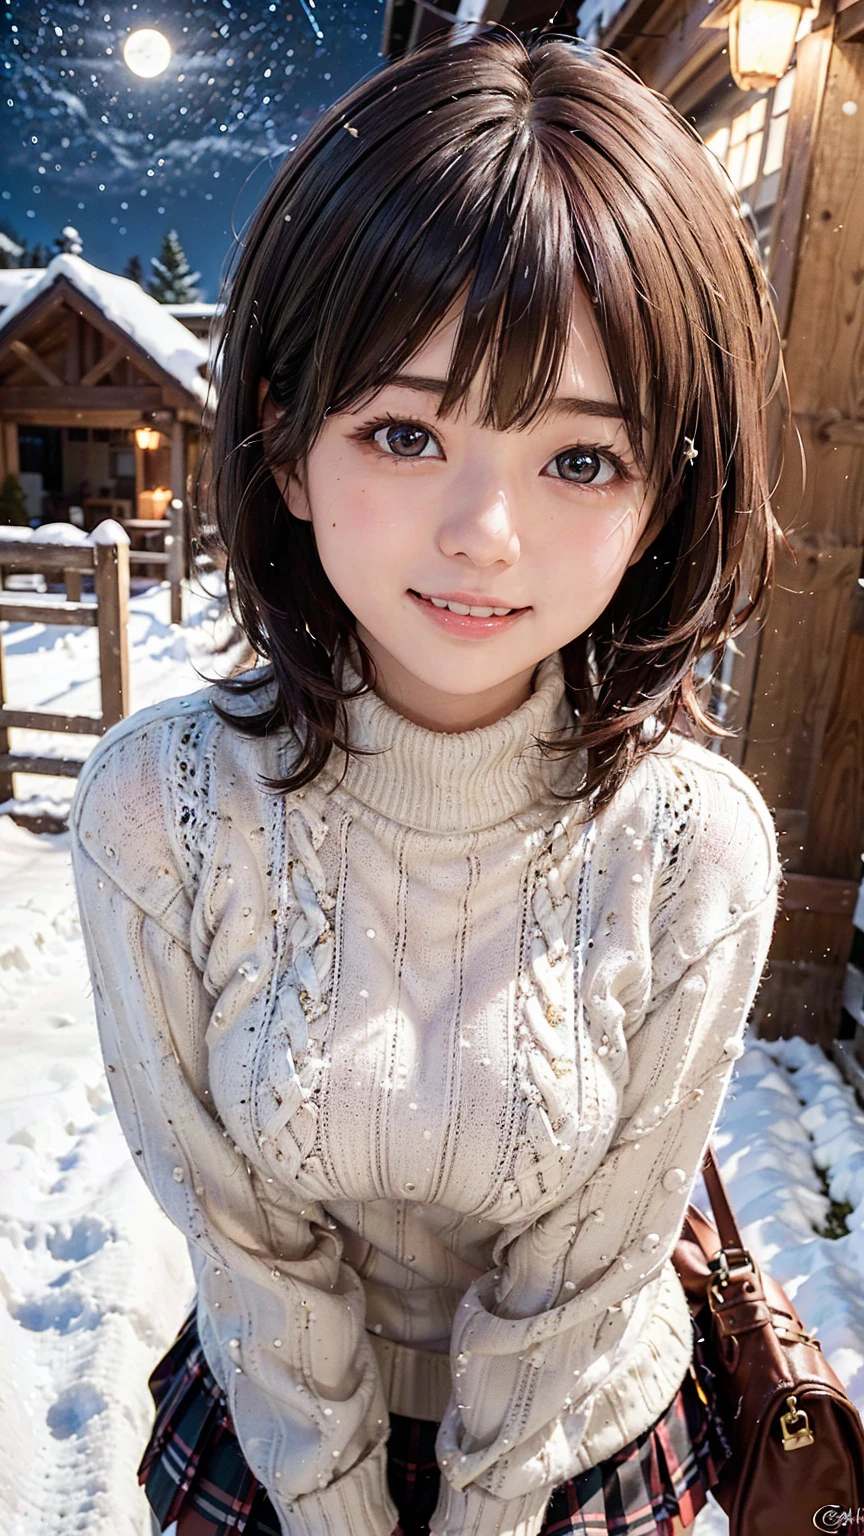 8K quality,(super masterpiece:1.3),highest quality,Detailed Images,The real picture,Natural lighting,symmetrical beauty,1 female,Japanese,20-year-old,(微smile,smile,smile),Medium Hair,Curly Hair,(very cute:1.3),Thick eyebrows,(Double:1.2),(Realistic eyes:1.1),clothing(Duffle coat,Turtleneck sweater,skirt,stockings),(Background is sky,Aerial,Night view,winter,snow,full moon,Starry Sky),(Face directly towards the camera,Looking directly at the viewer,looking at the camera,The body faces the viewer,The body is facing the direction of the camera,Face looking straight into the camera).